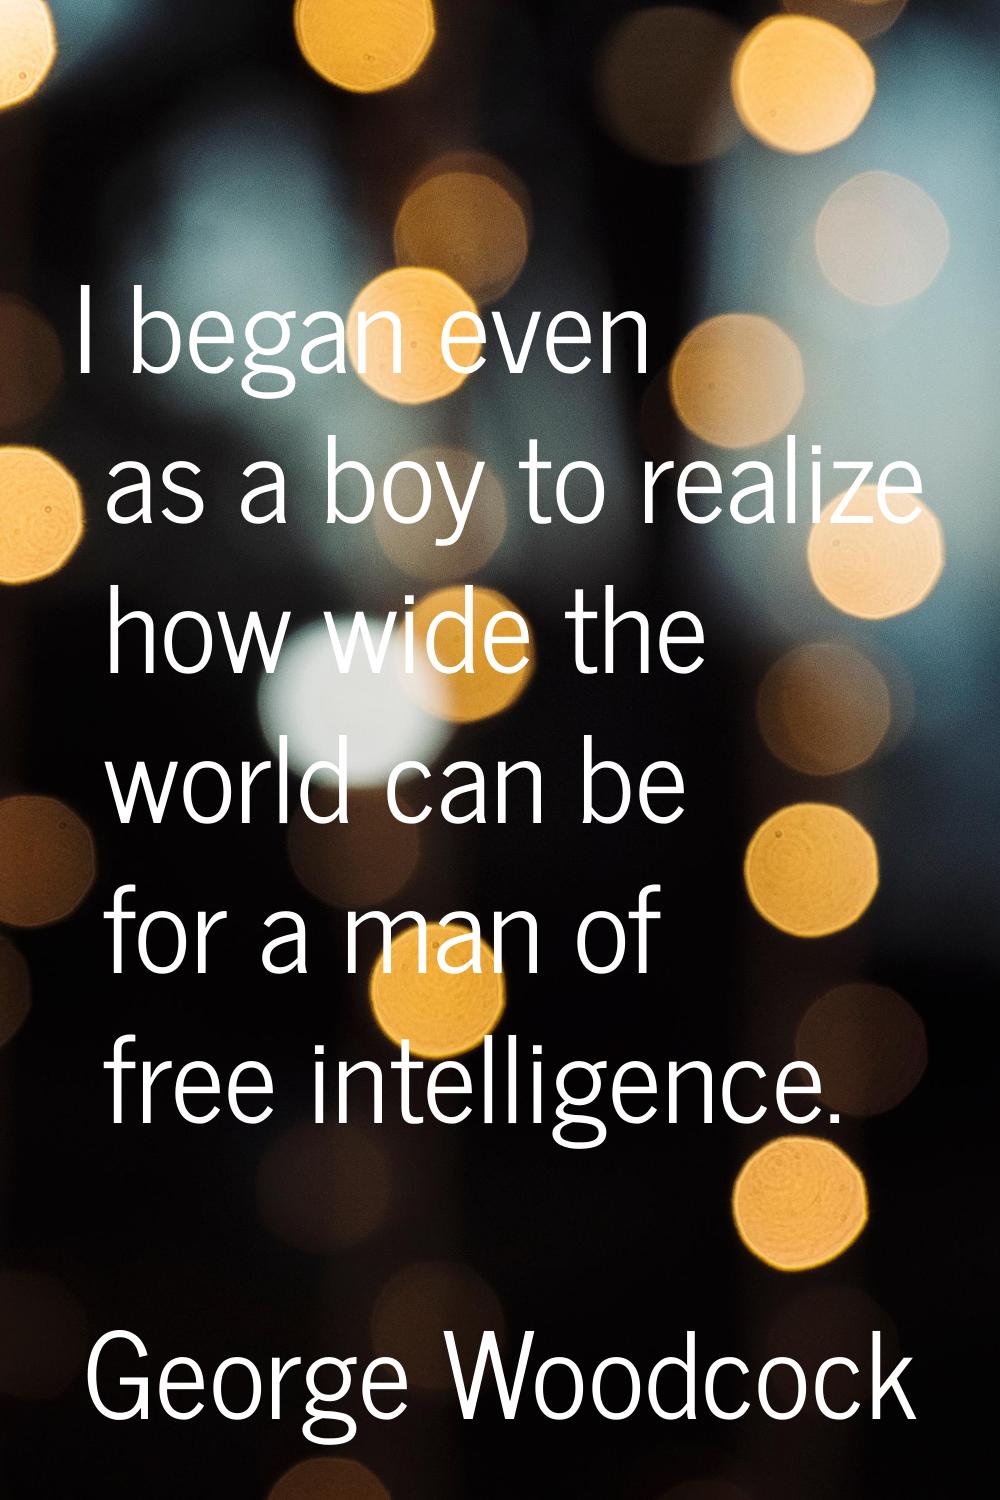 I began even as a boy to realize how wide the world can be for a man of free intelligence.